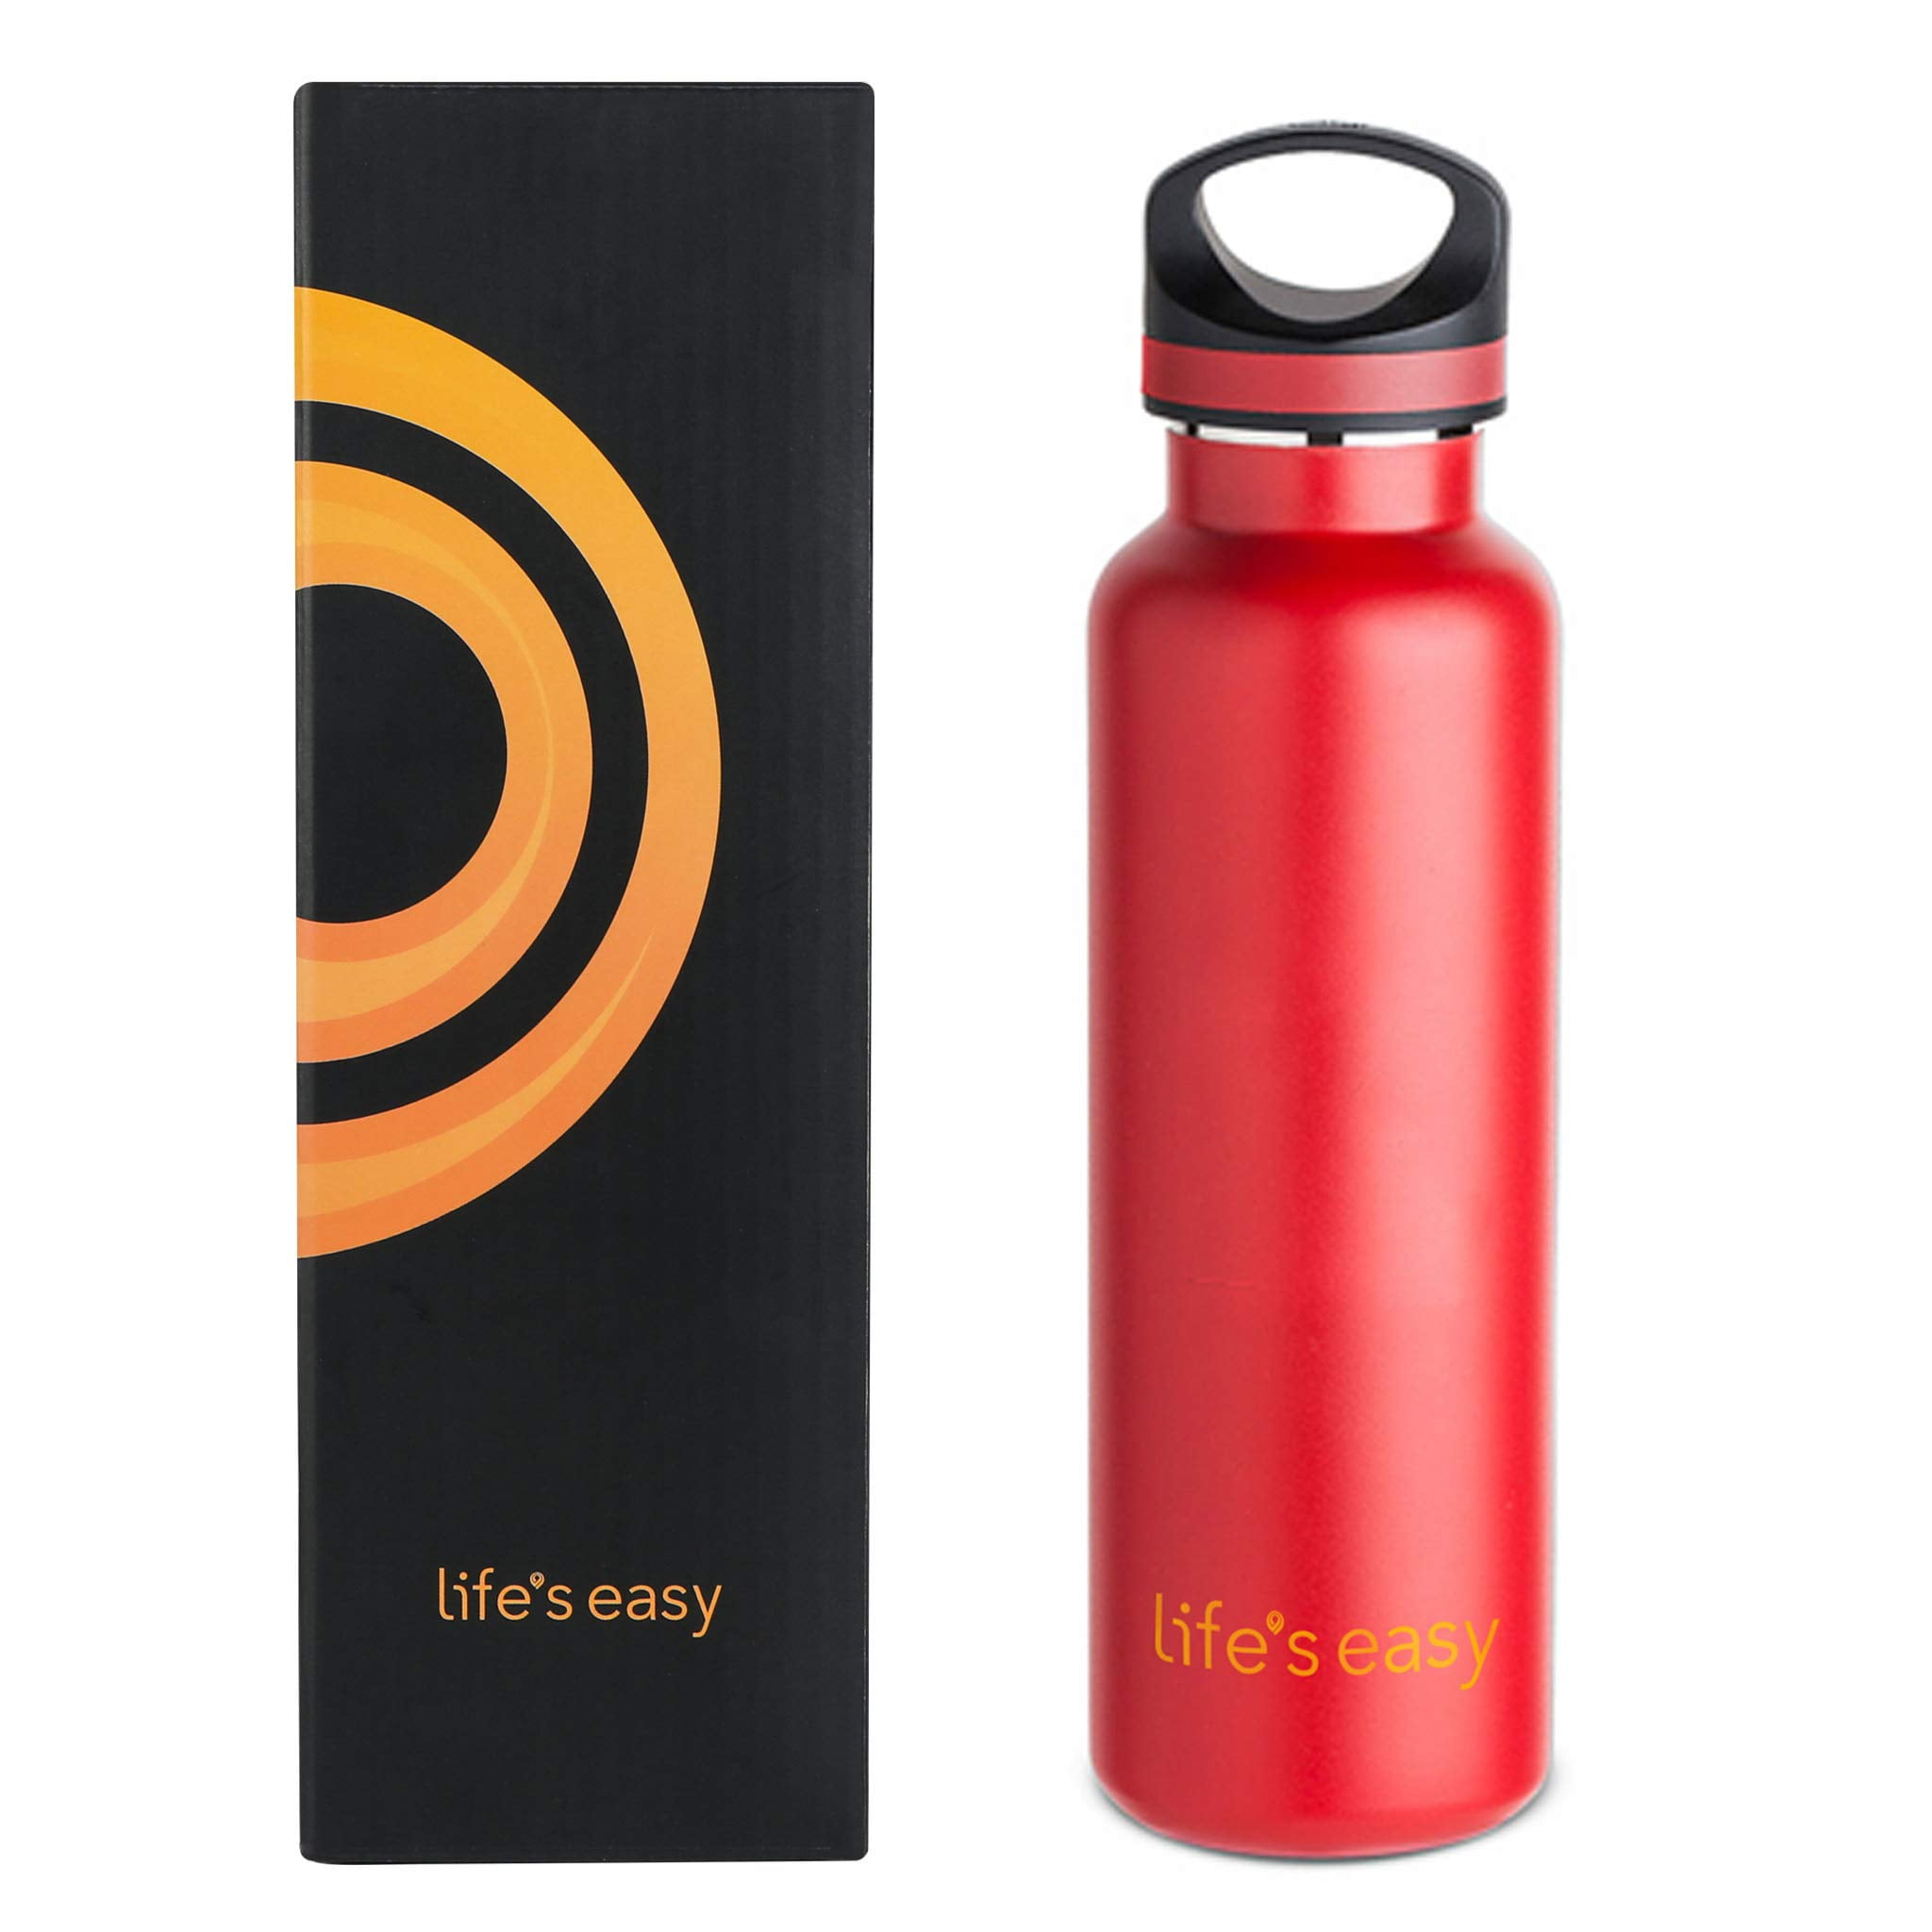 Triple-Insulated Stainless-Steel Water Bottle Flip-Top Lid - (21 oz)  Insulated Water Bottles, Keeps Hot and Cold - Wide Mouth and Leakproof -  Canteen